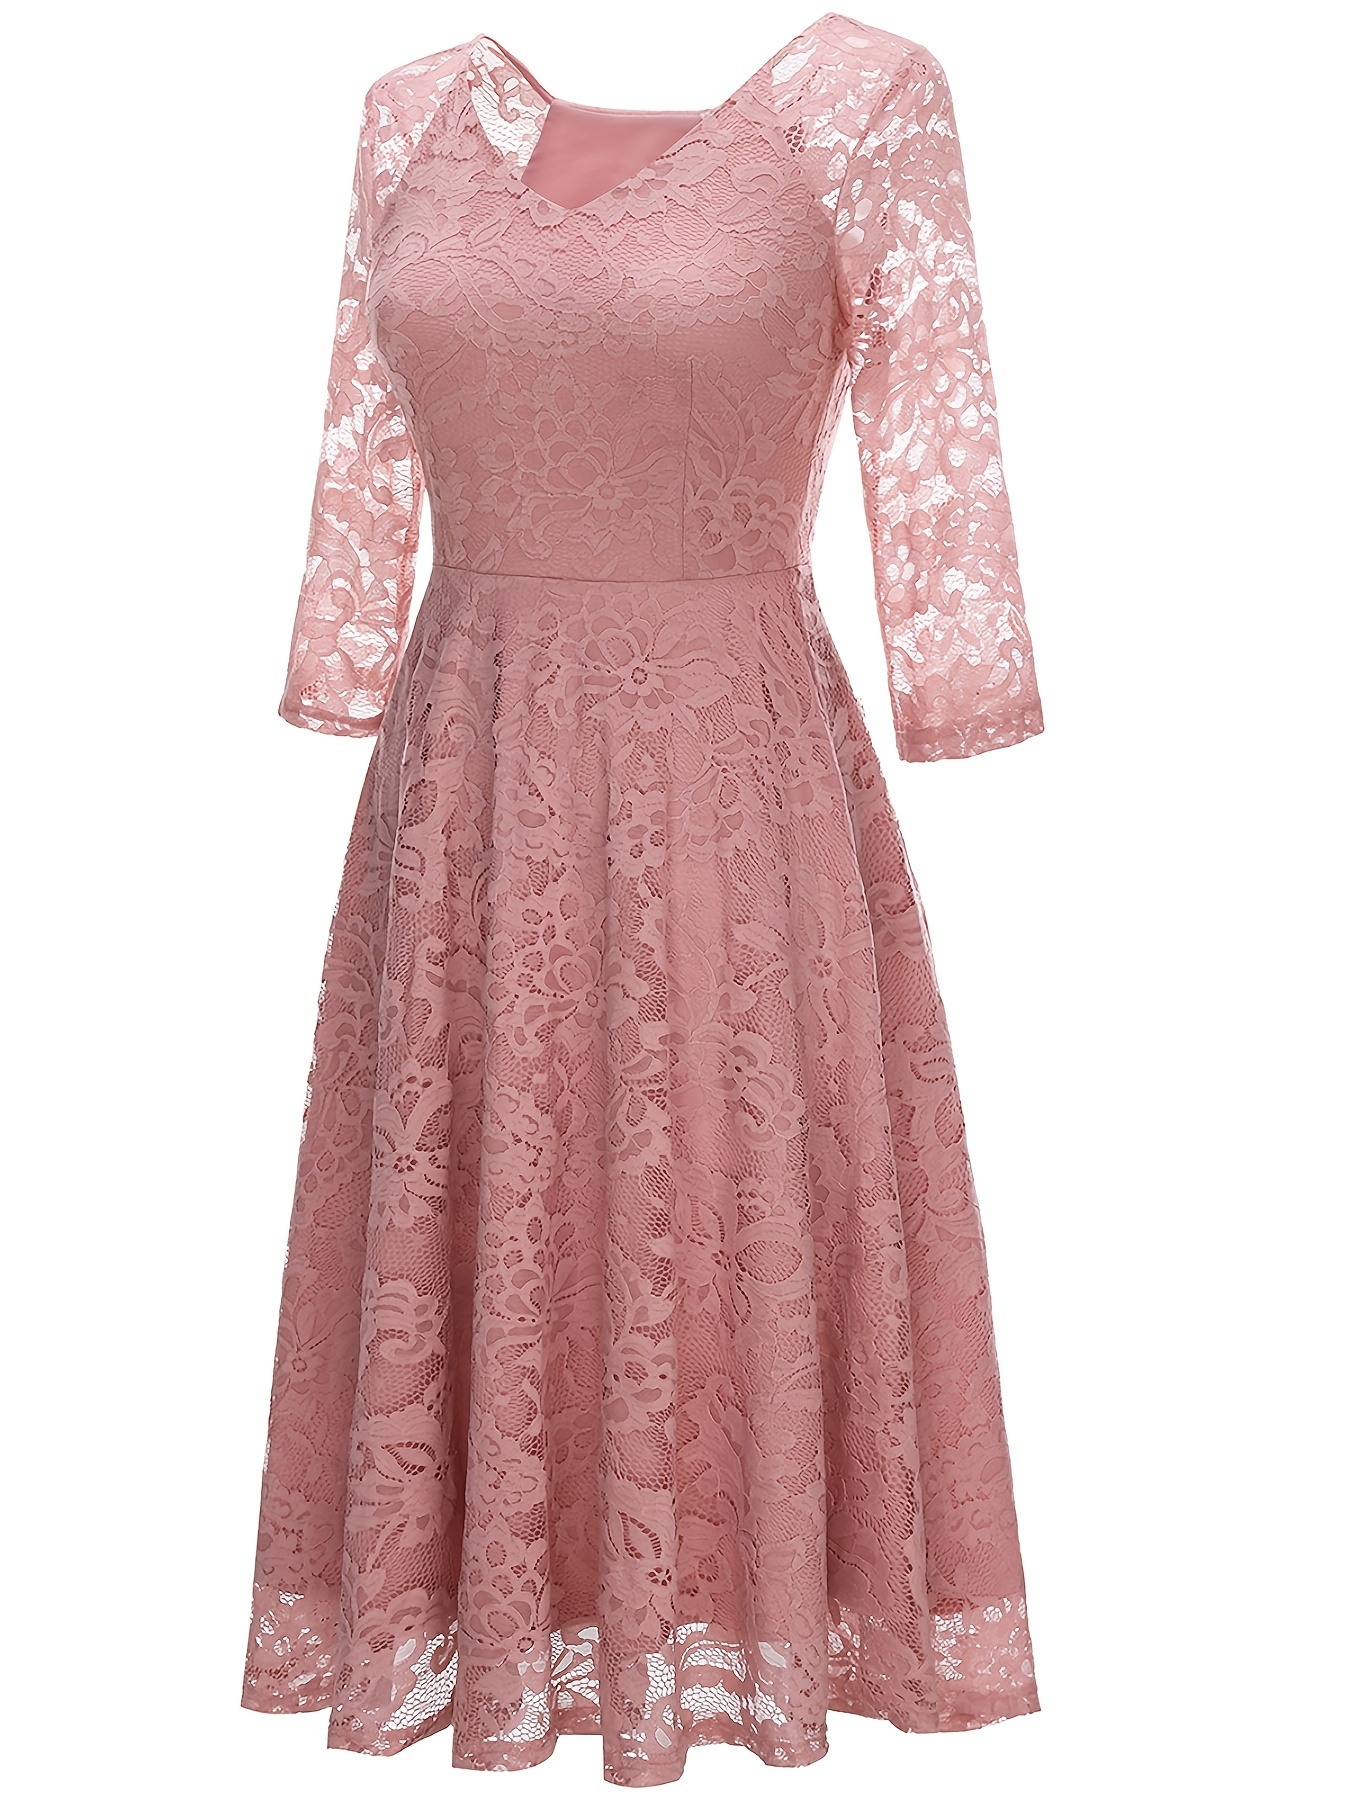 Pink Lace Dress for Women